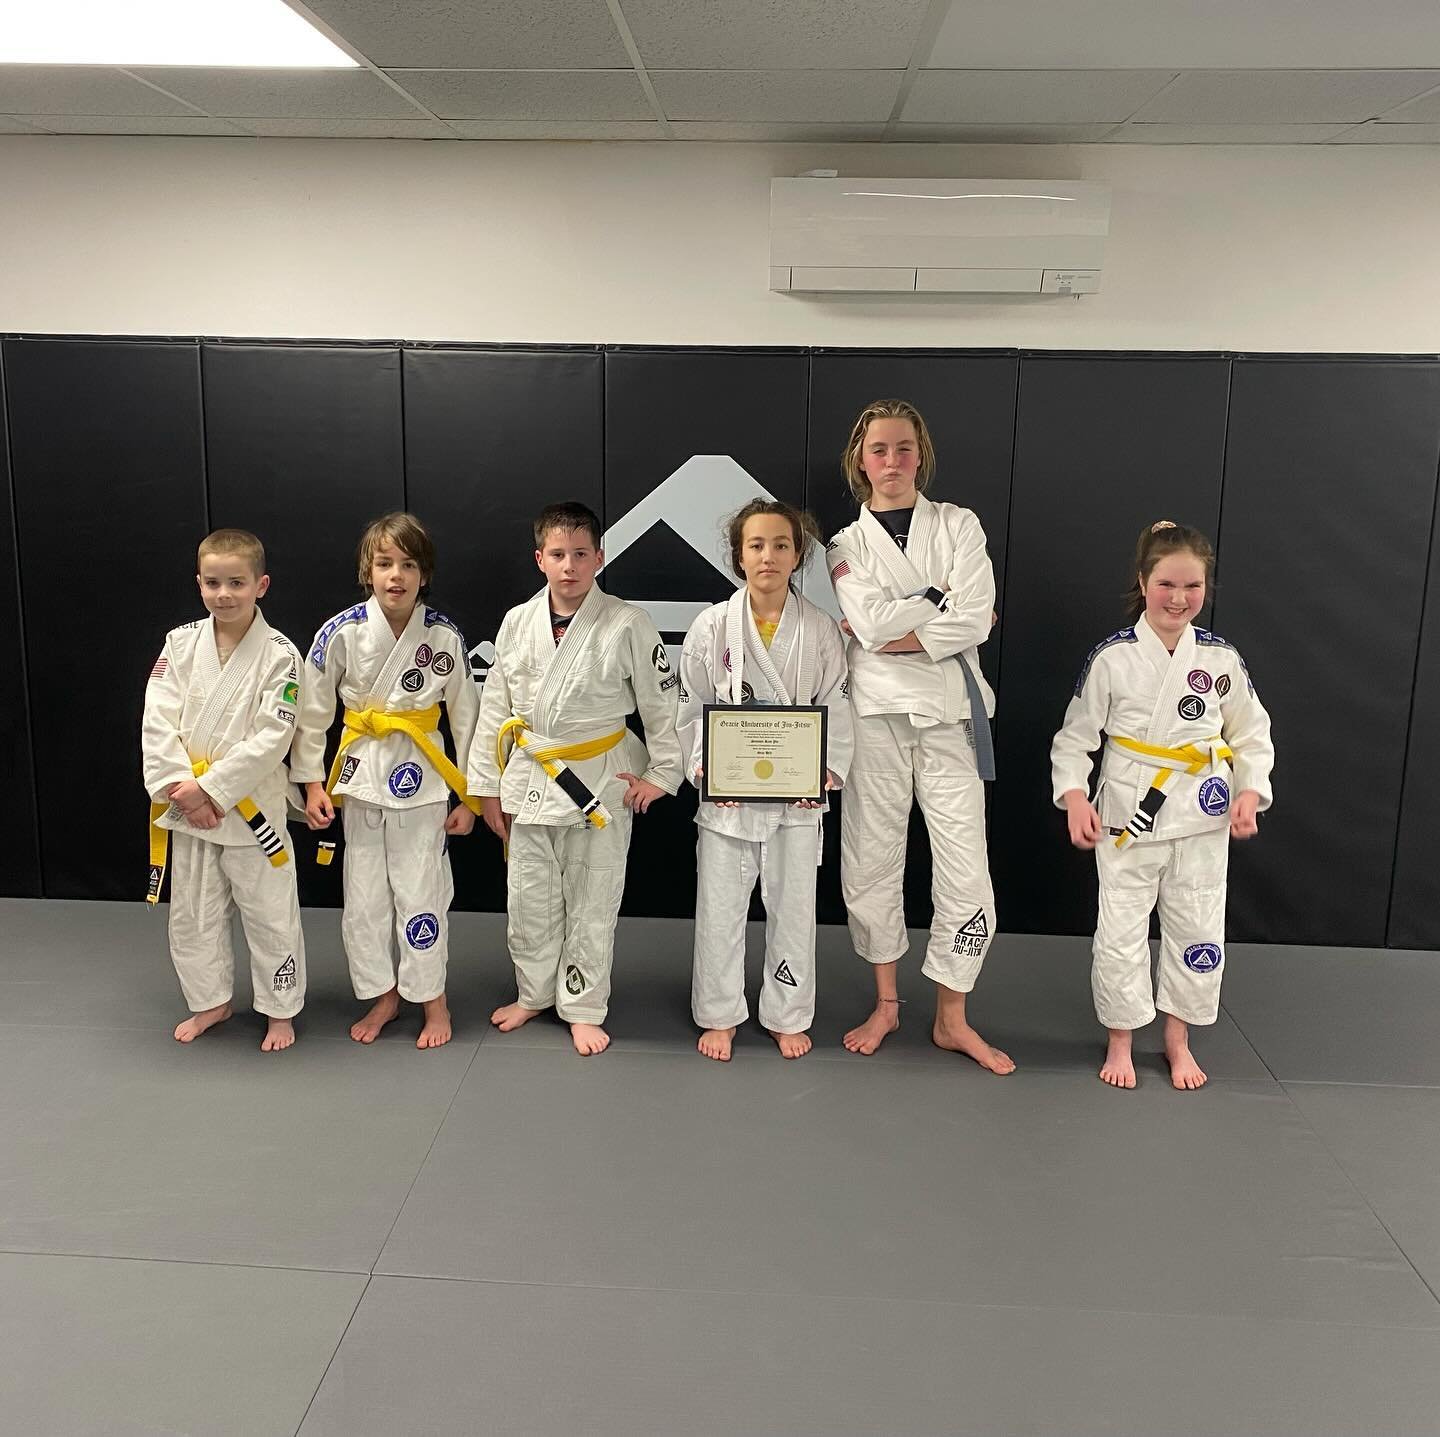 &ldquo;Hey kids, look tough!&rdquo; Congratulations to our newest Gracie Bullyproof Gray belt and to the start of our kids Black Belt Club!